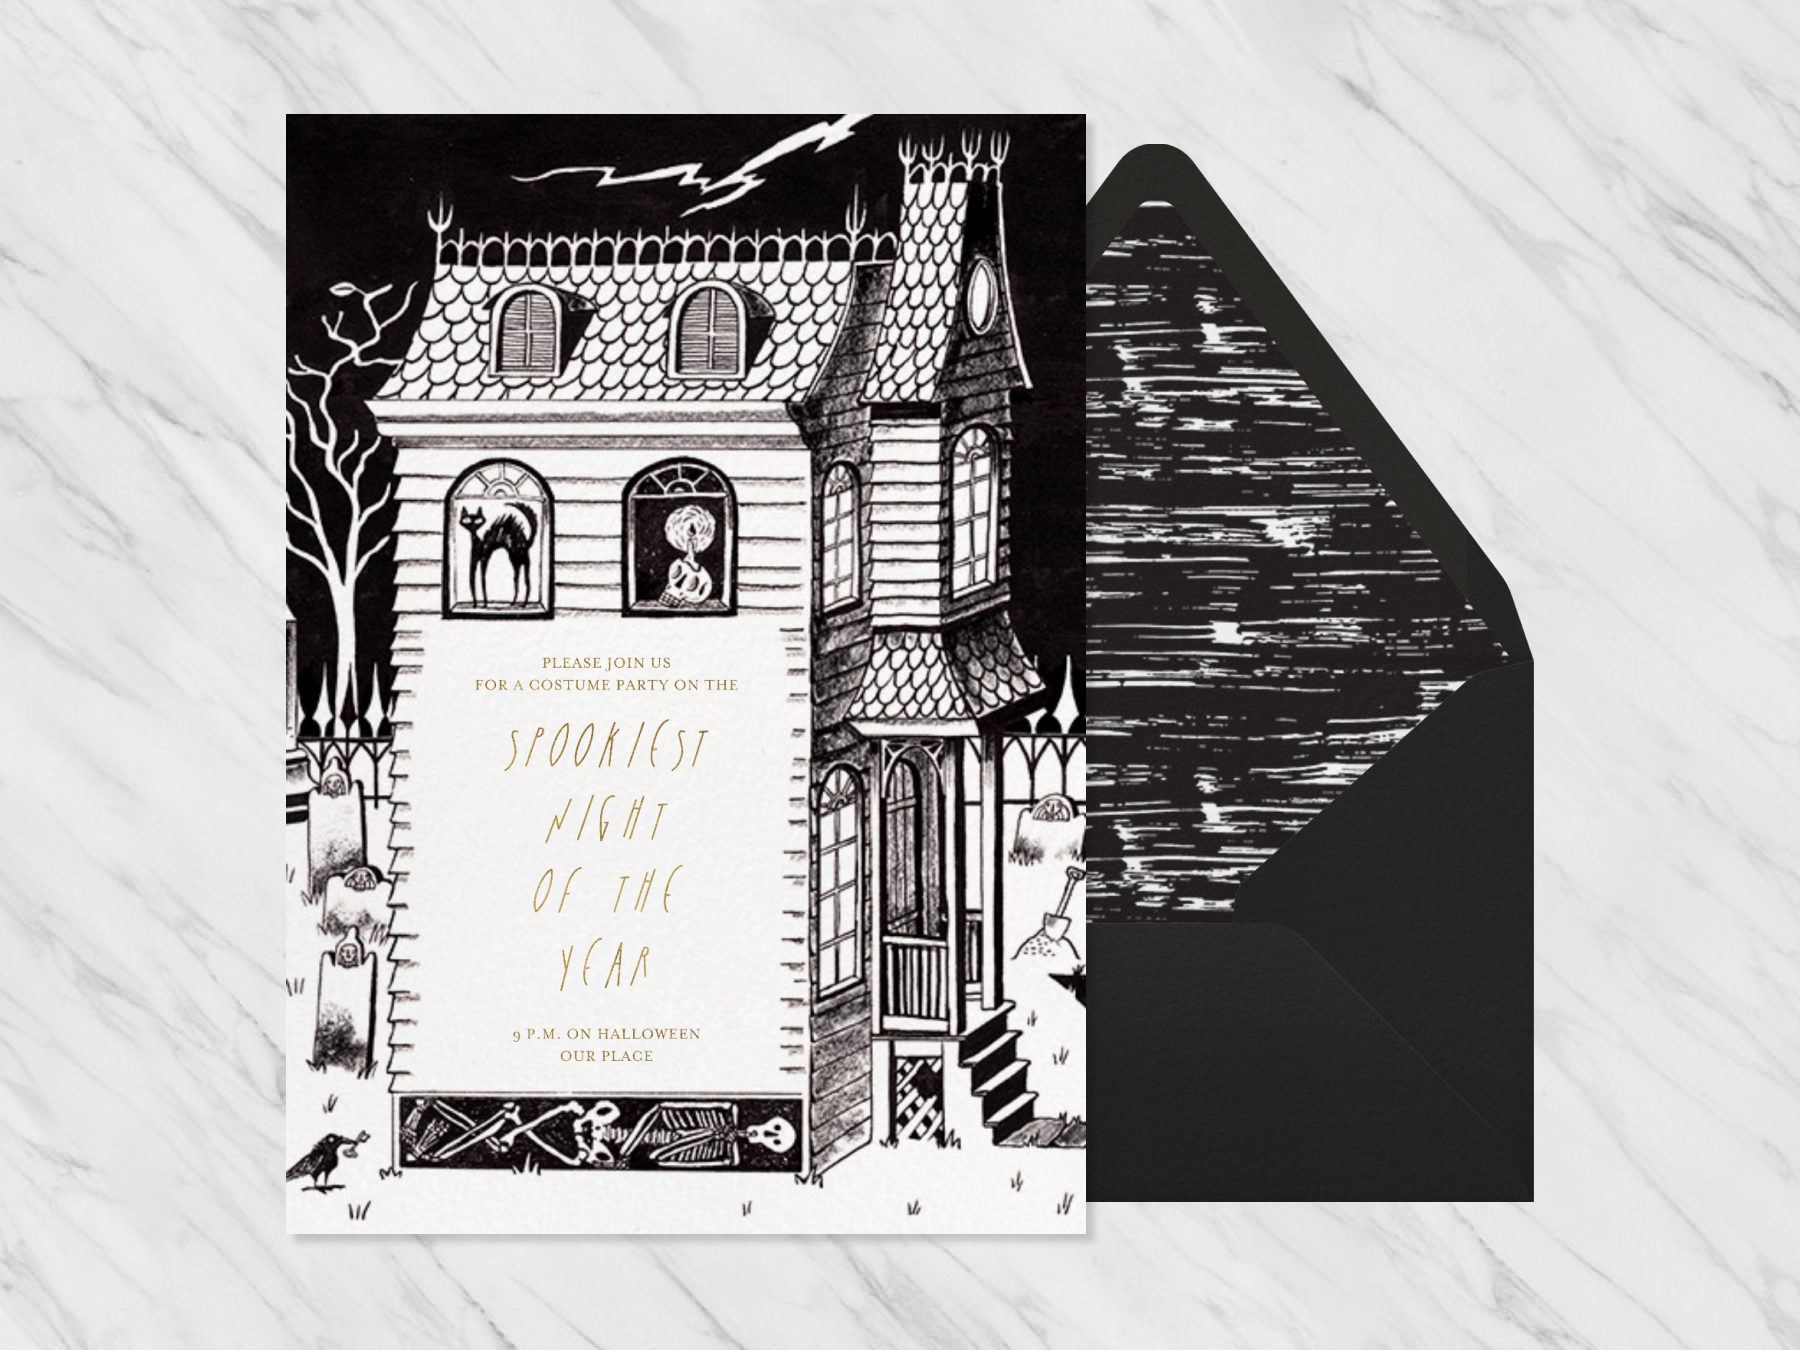 A black and white Halloween invitation featuring a black cat in the window of a haunted house.